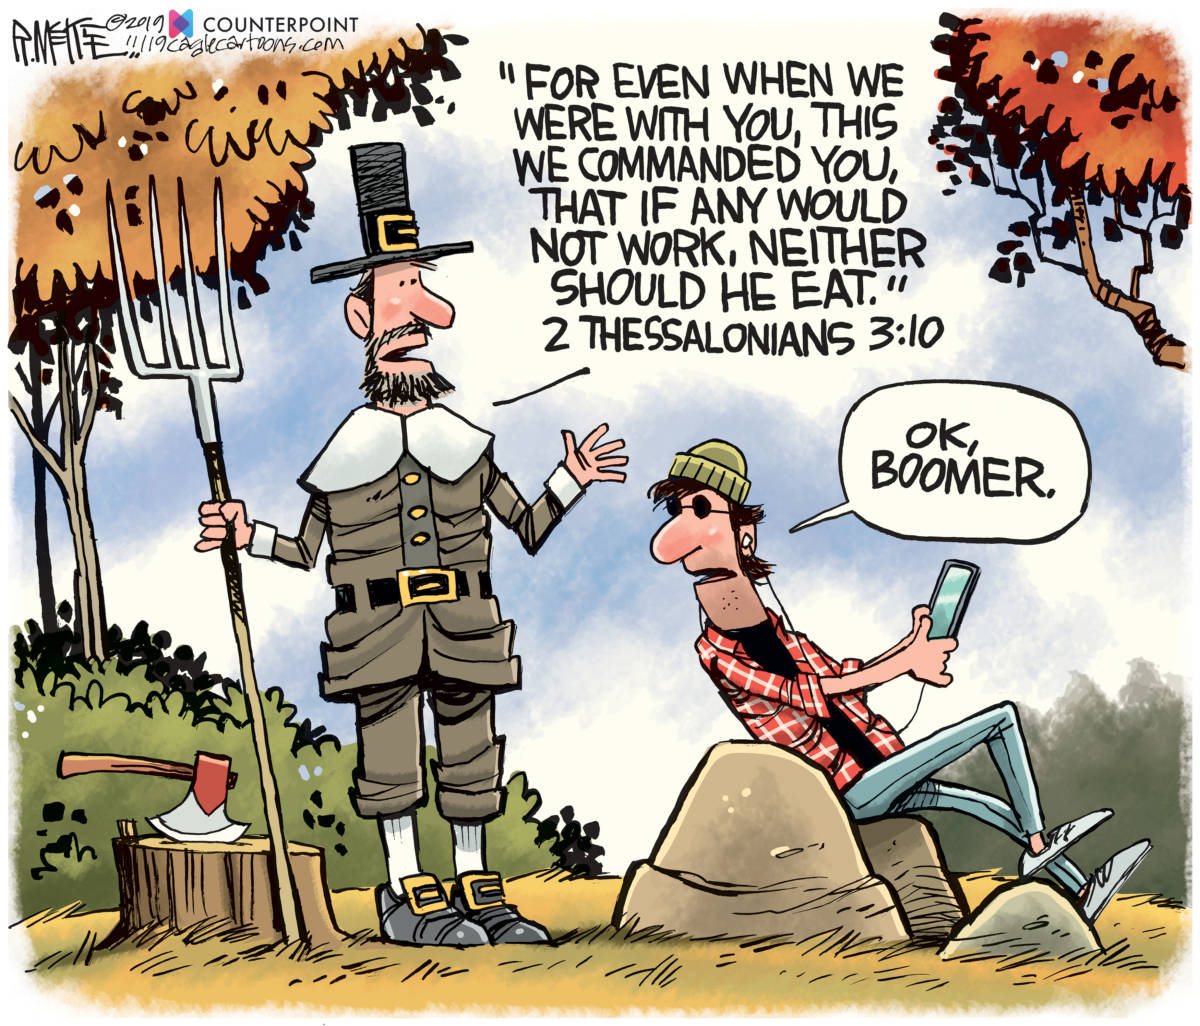 Thanksgiving OK Boomer by Rick McKee, Counterpoint